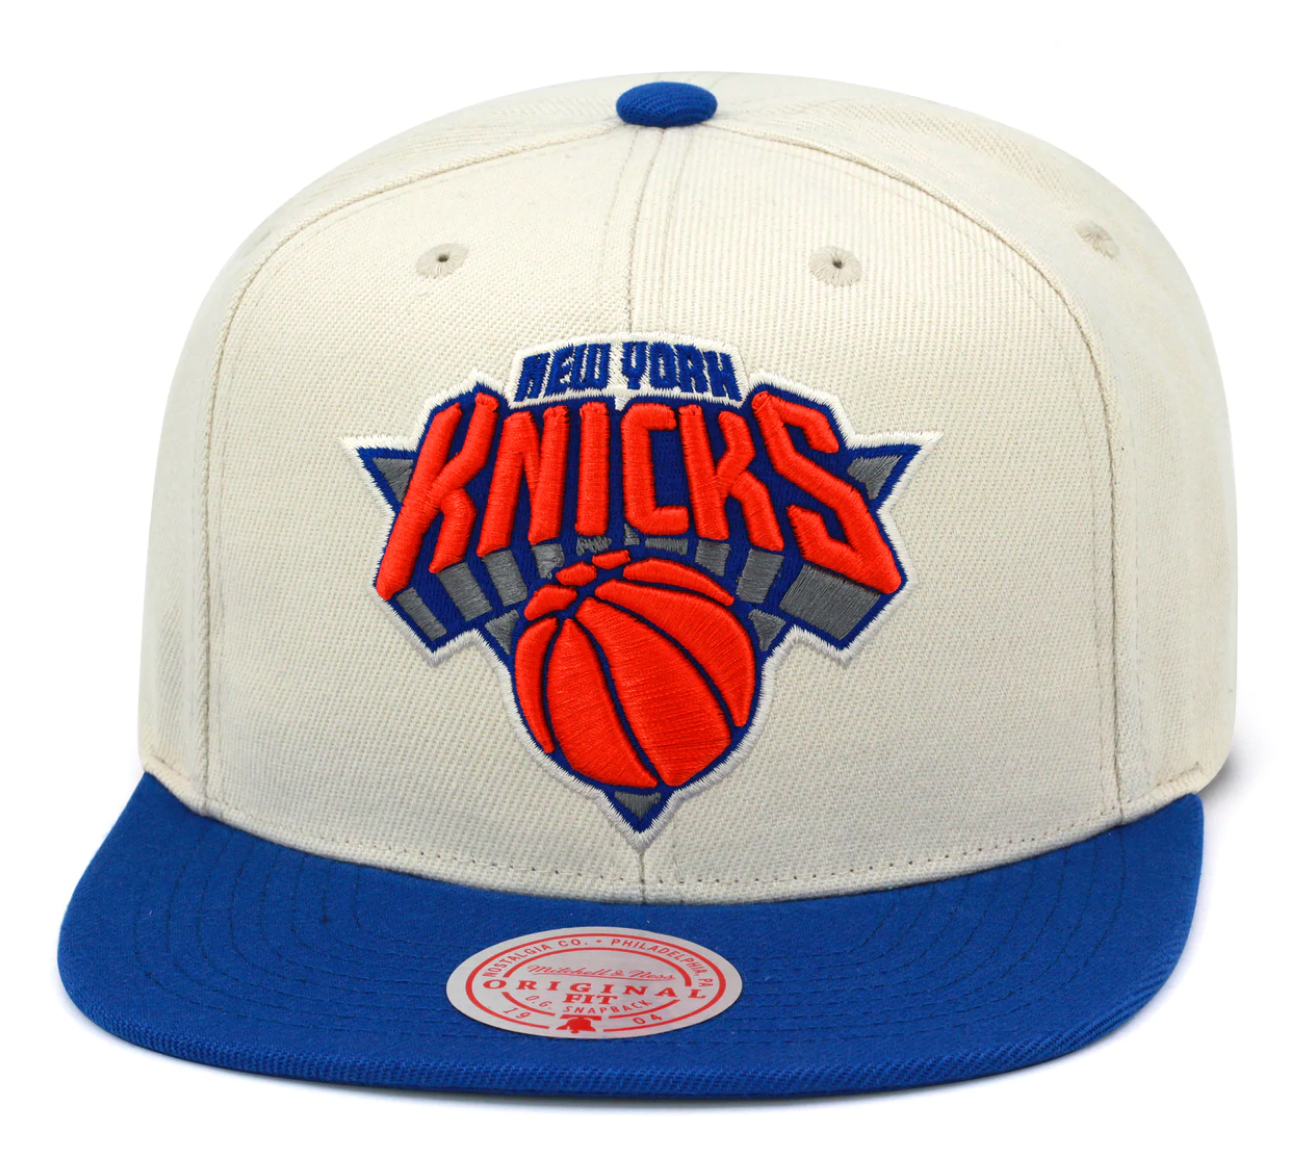 MITCHELL & NESS WOOL 2 TONE SNAPBACK LOS ANGELES CLIPPERS for